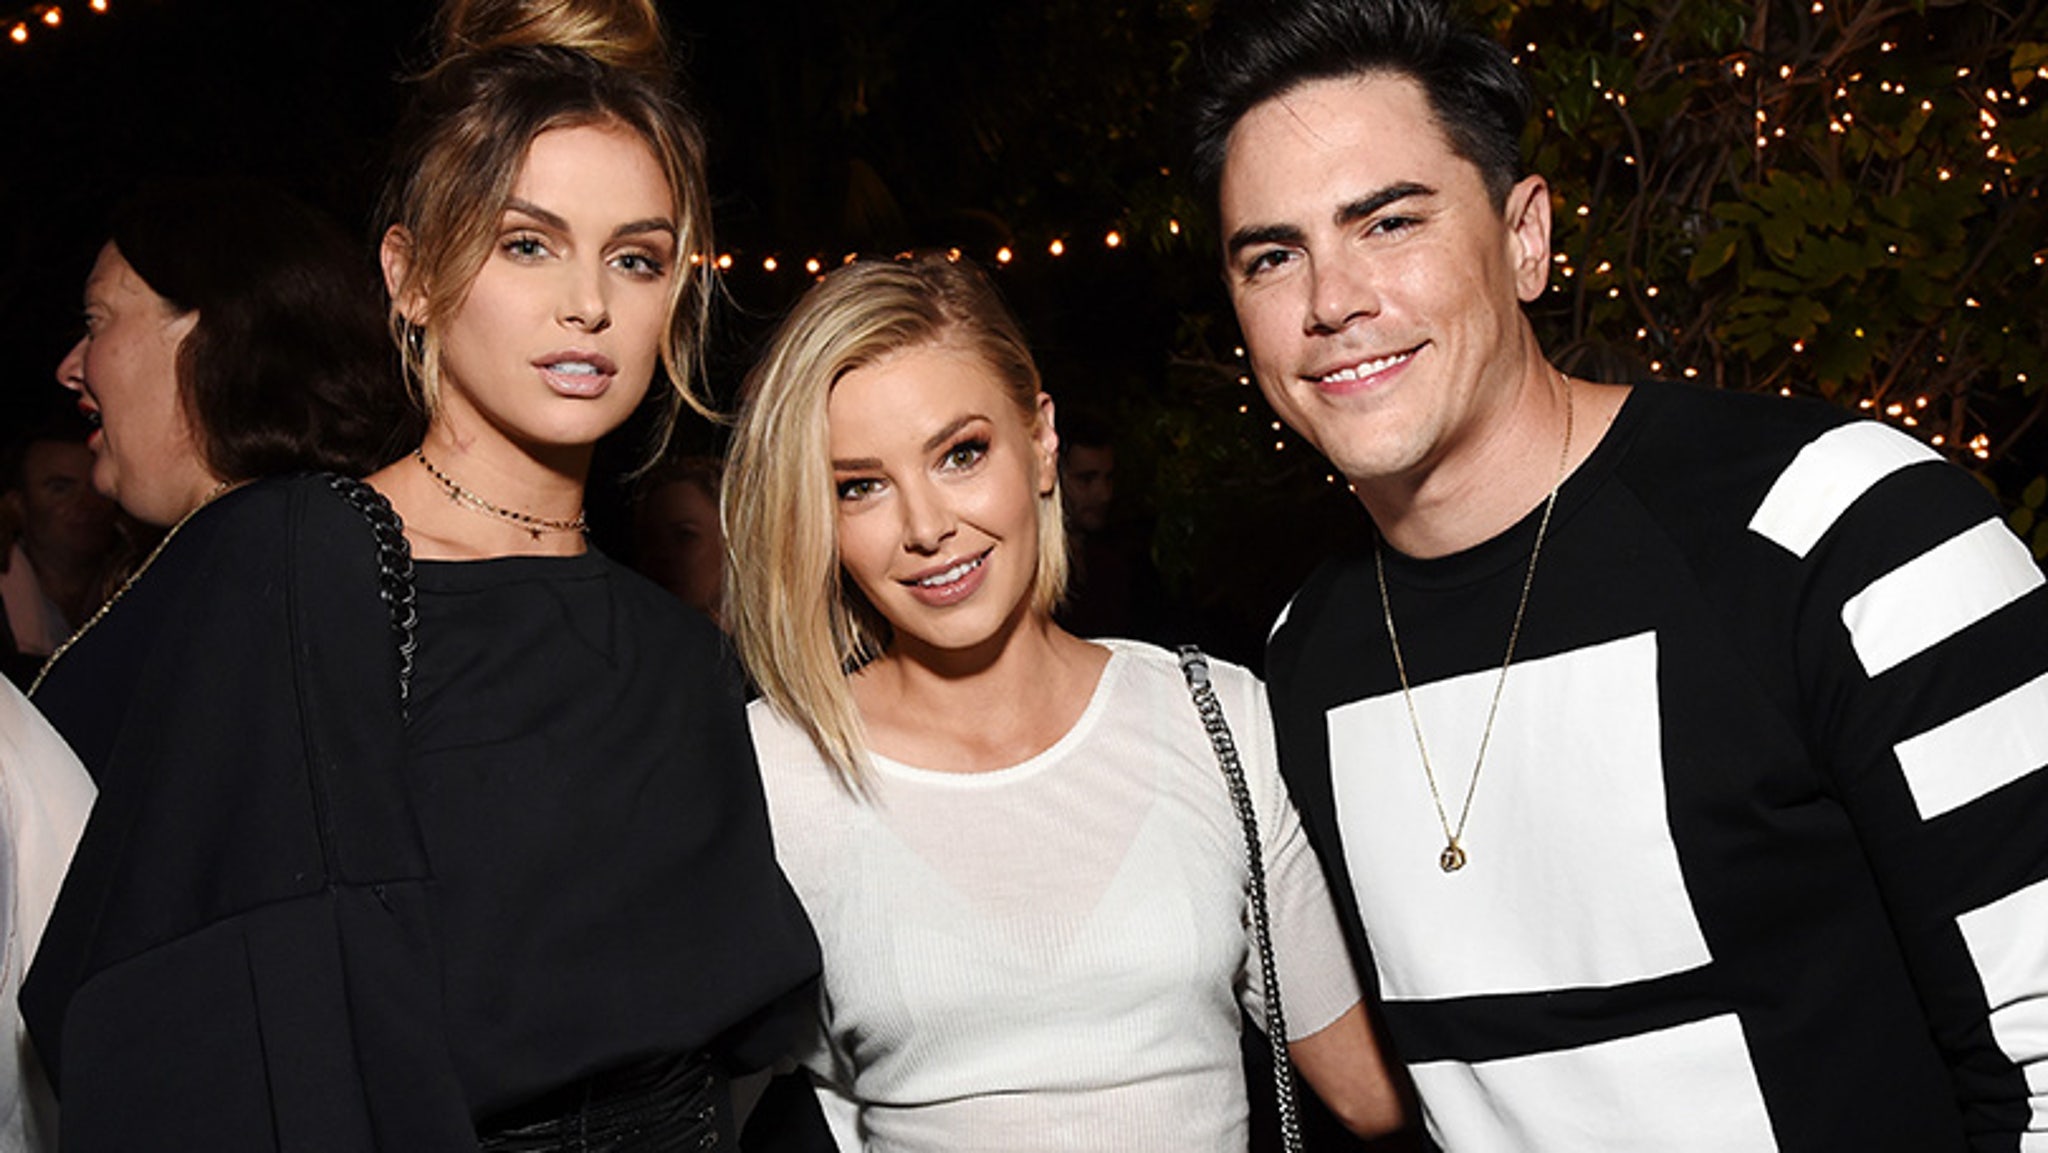 Lala Kent Calls Tom Sandoval and Raquel Leviss 'Disgusting,' as Tom Apologizes to Ariana Madix